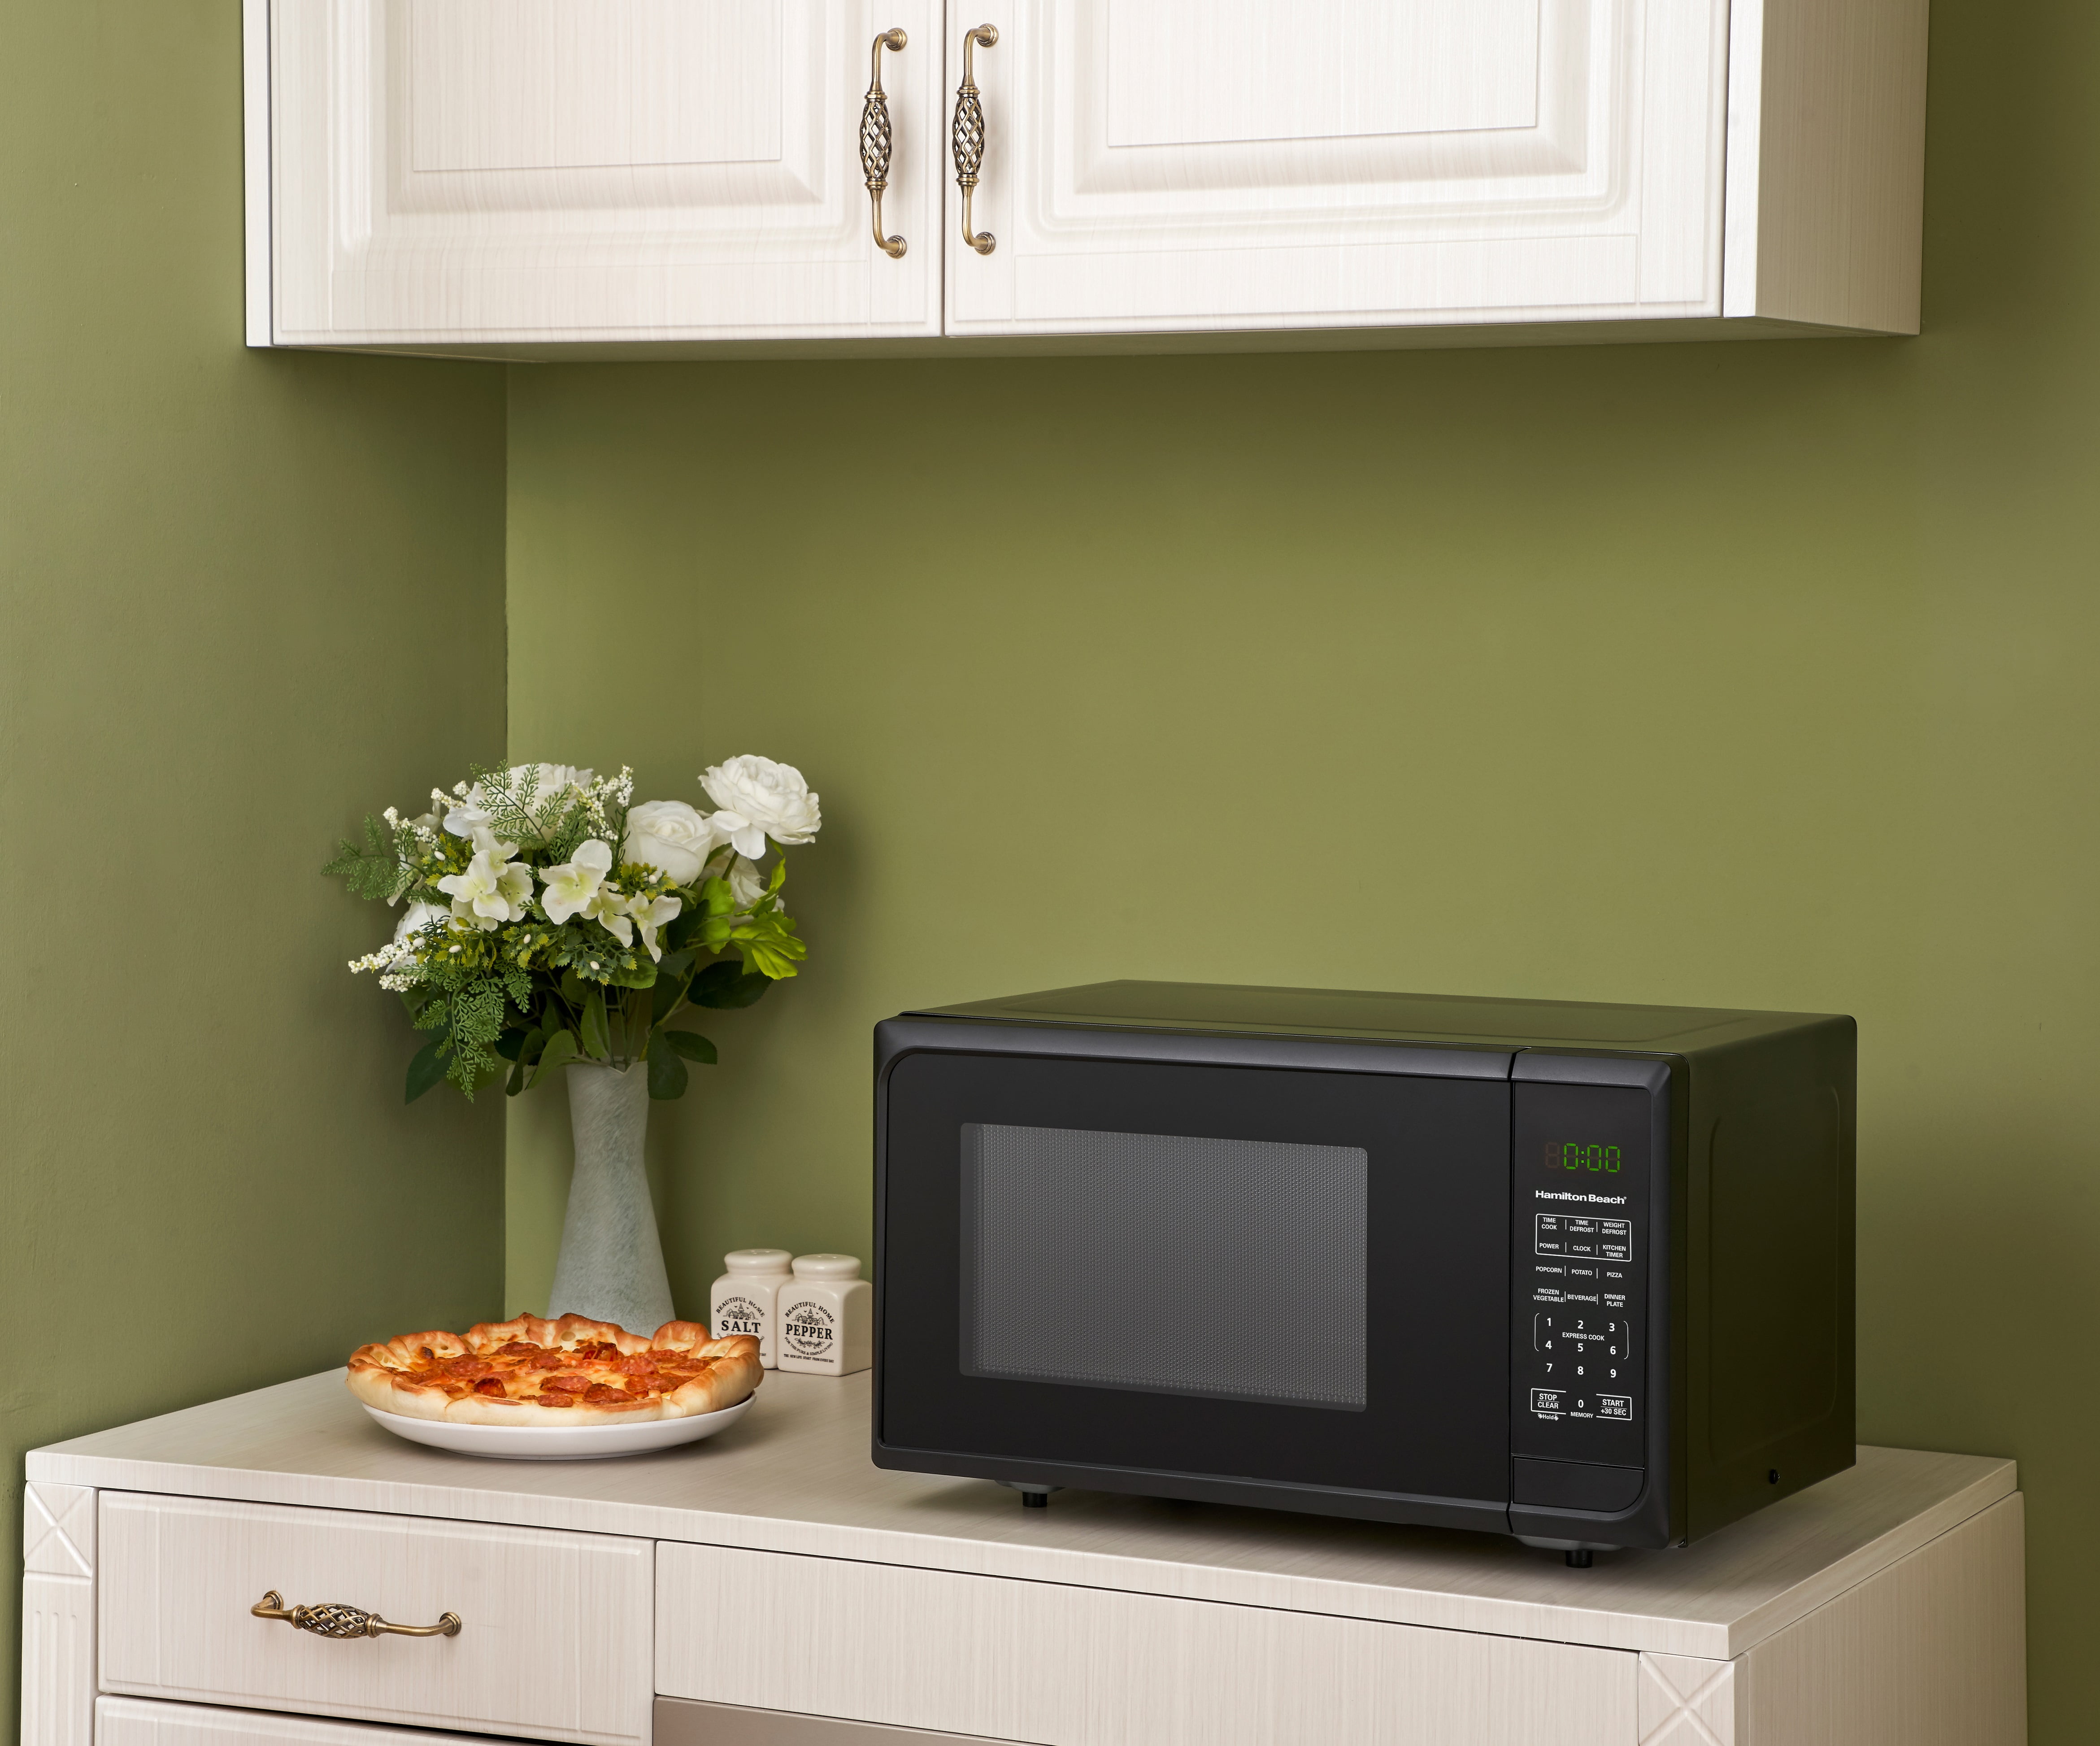 Forest River MCG992ARB 0.9 Cu ft. Microwave Oven, Black